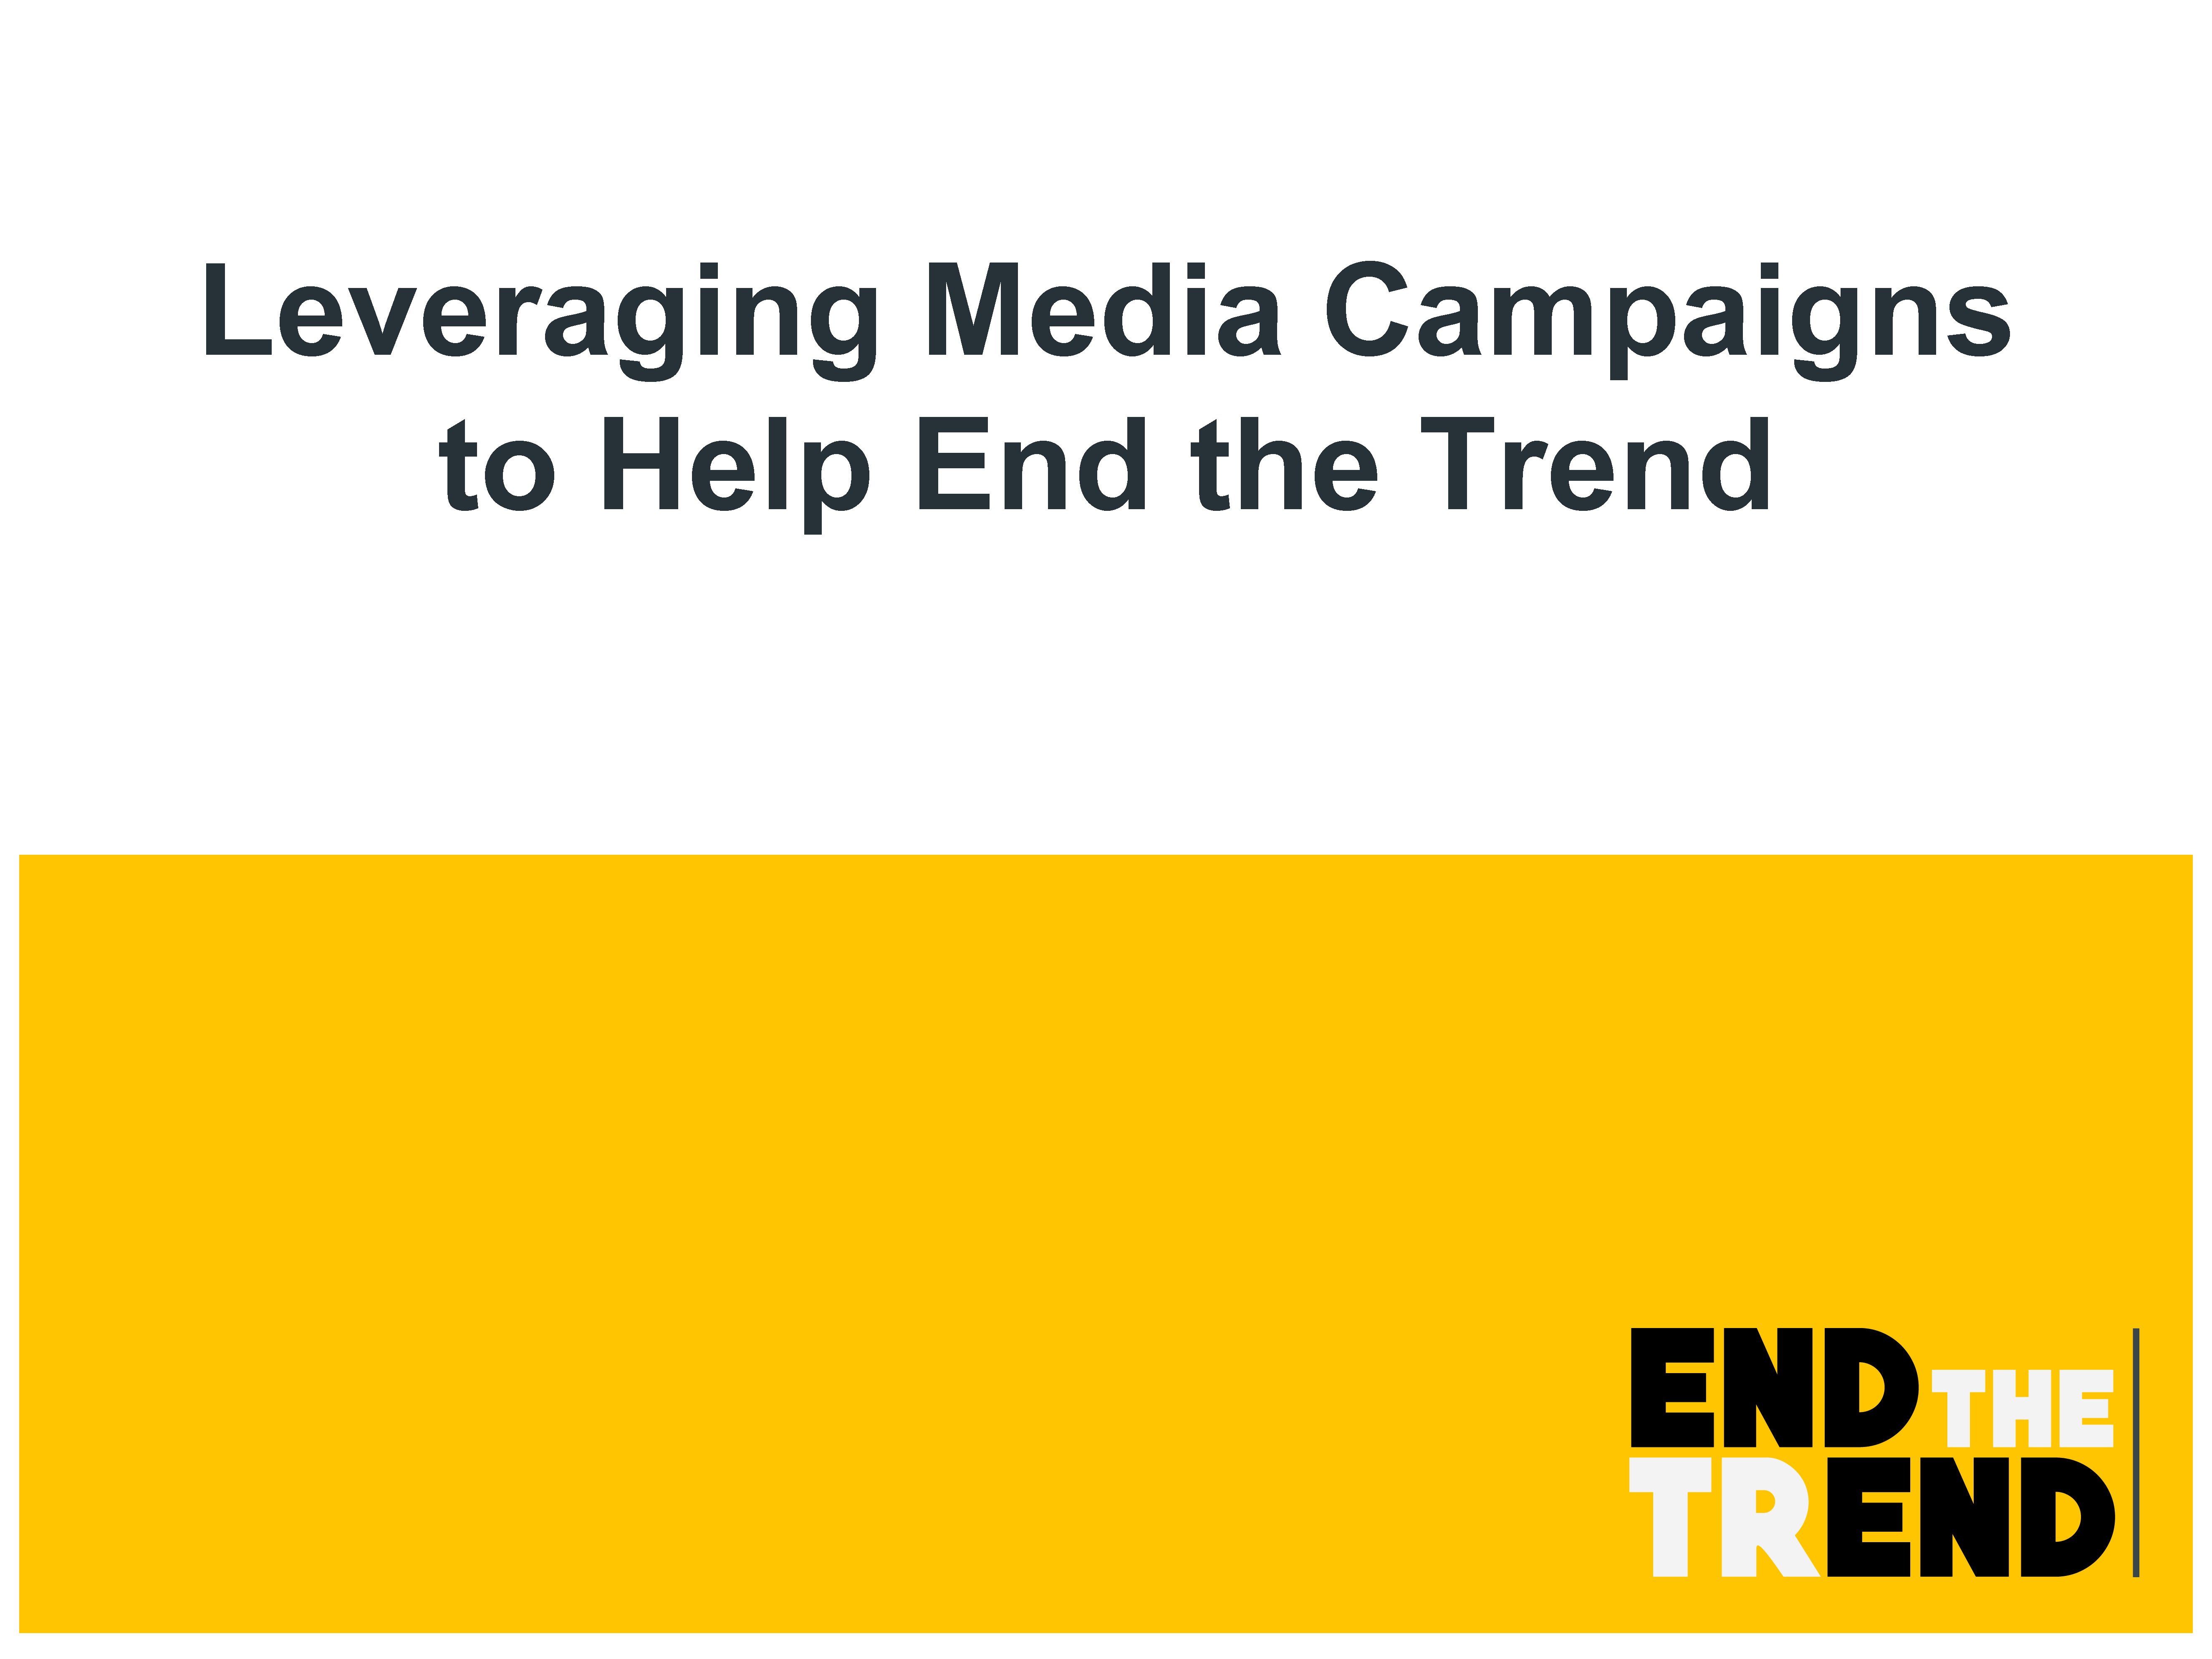 Leveraging Media Campaigns to Help End the Trend